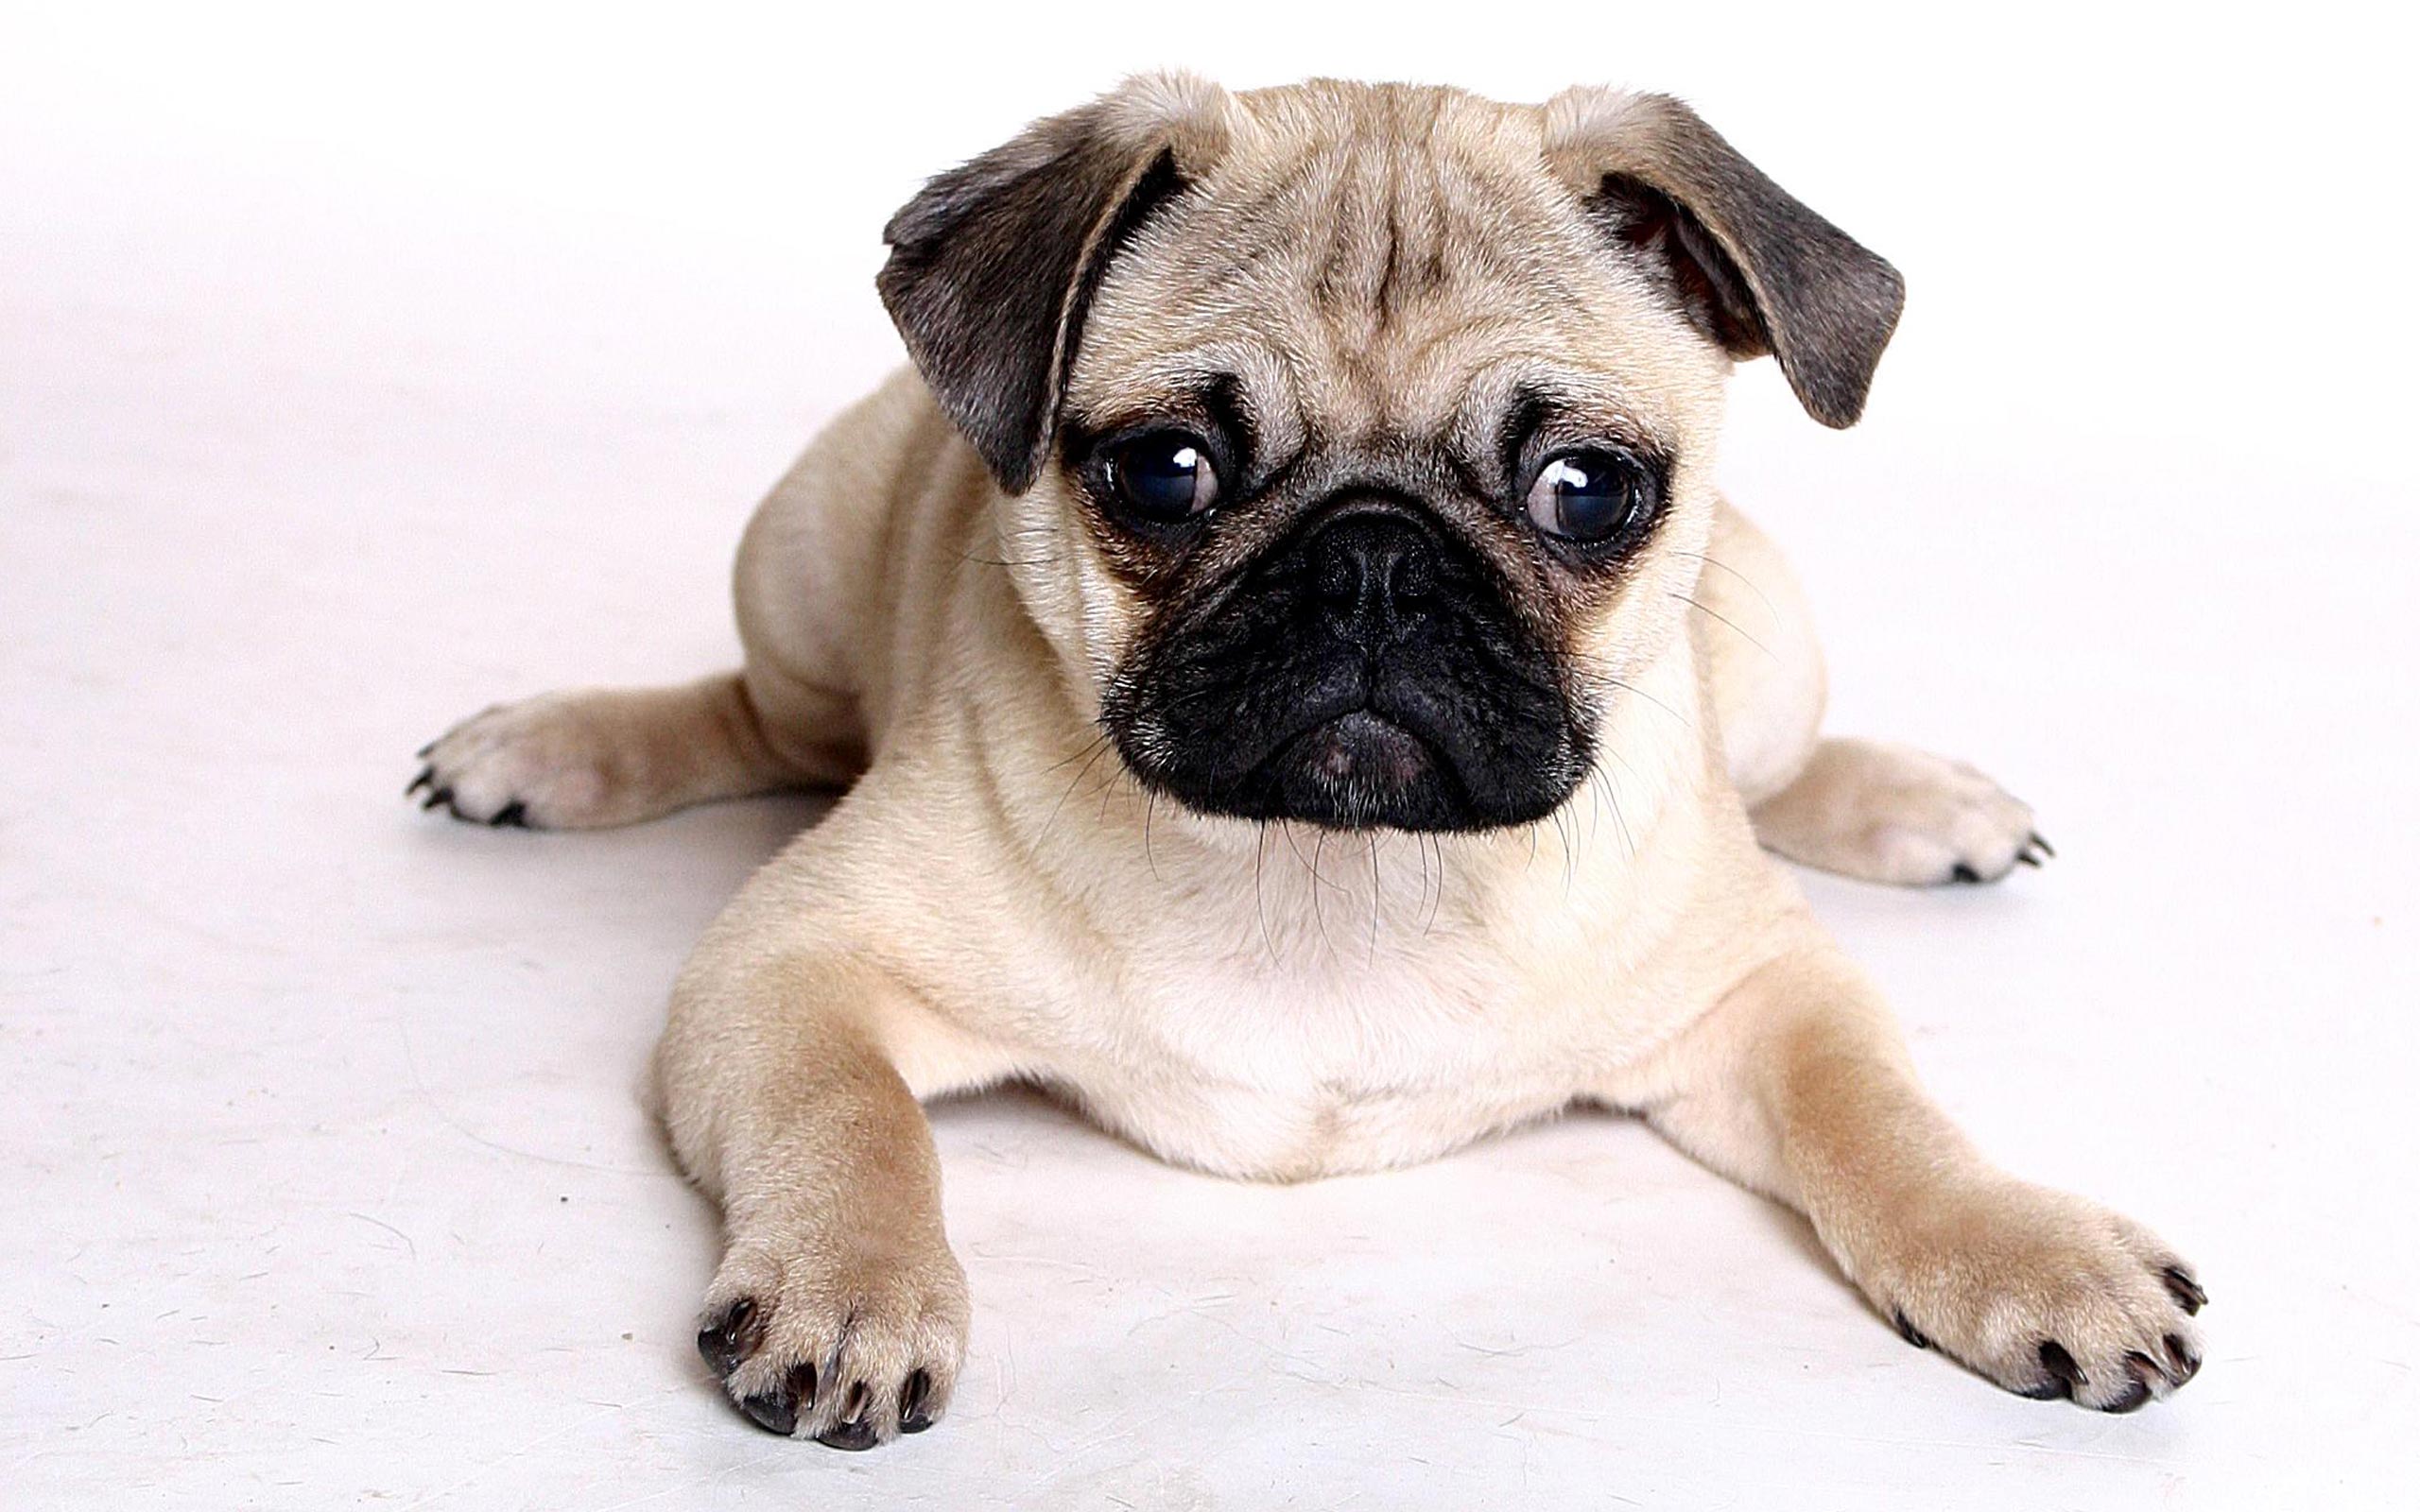  hd wallpapers new beautiful hd wallpapers of pug dog free download